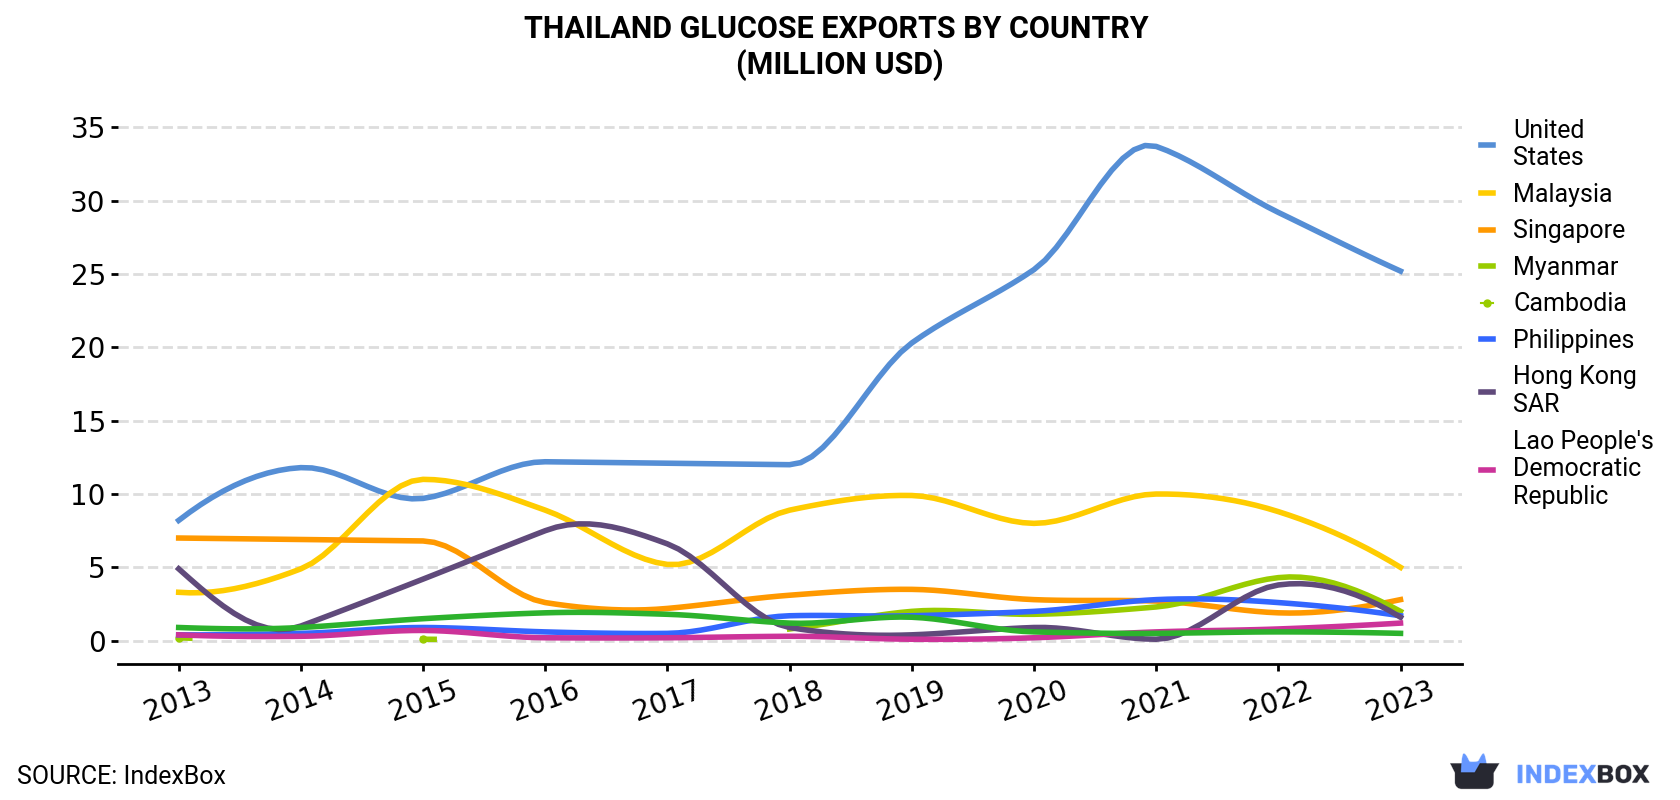 Thailand Glucose Exports By Country (Million USD)